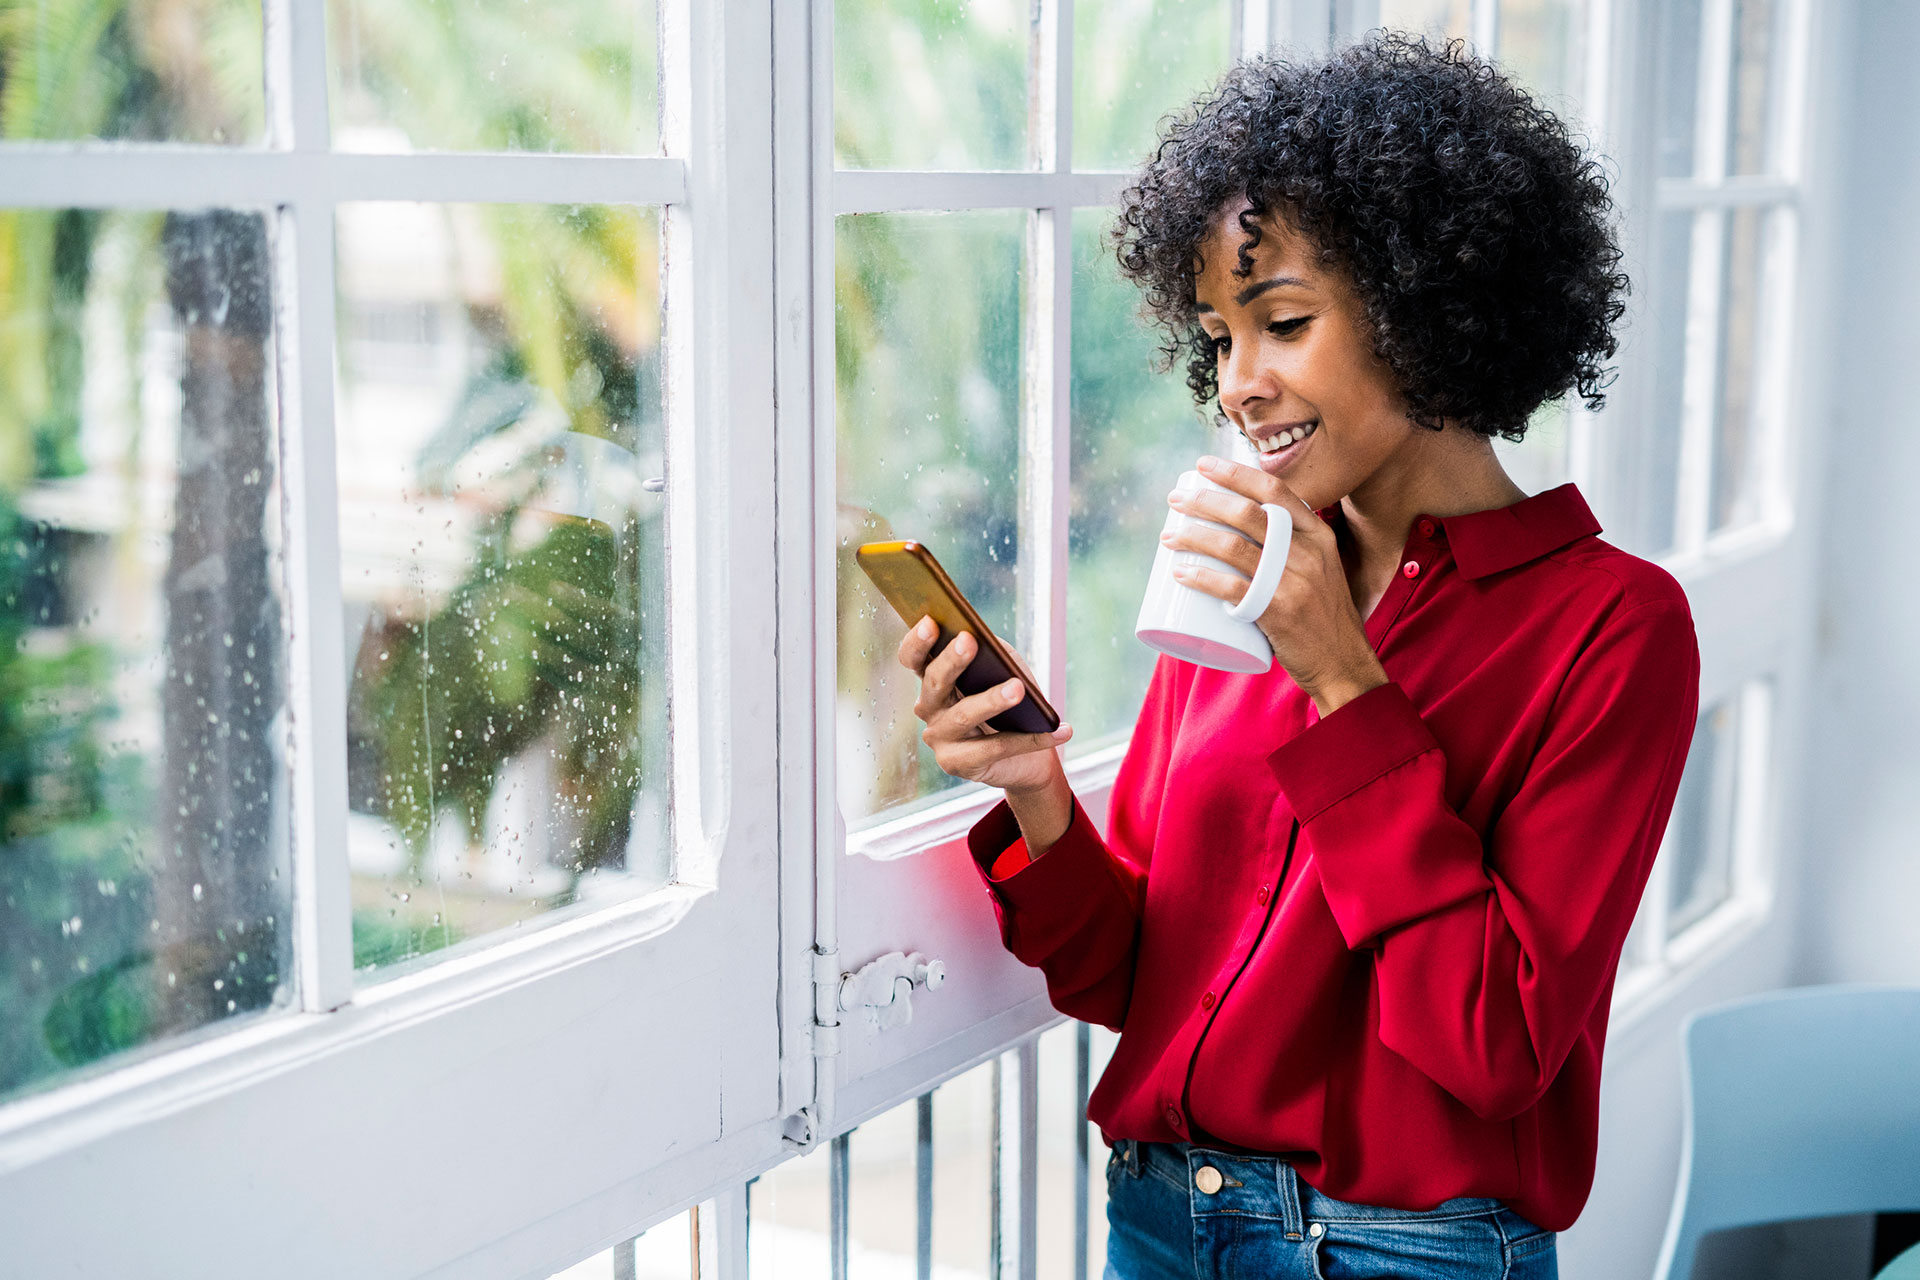 Young woman drinking a cup of coffee and holding her cell phone while standing in front of a window while it rains outside.